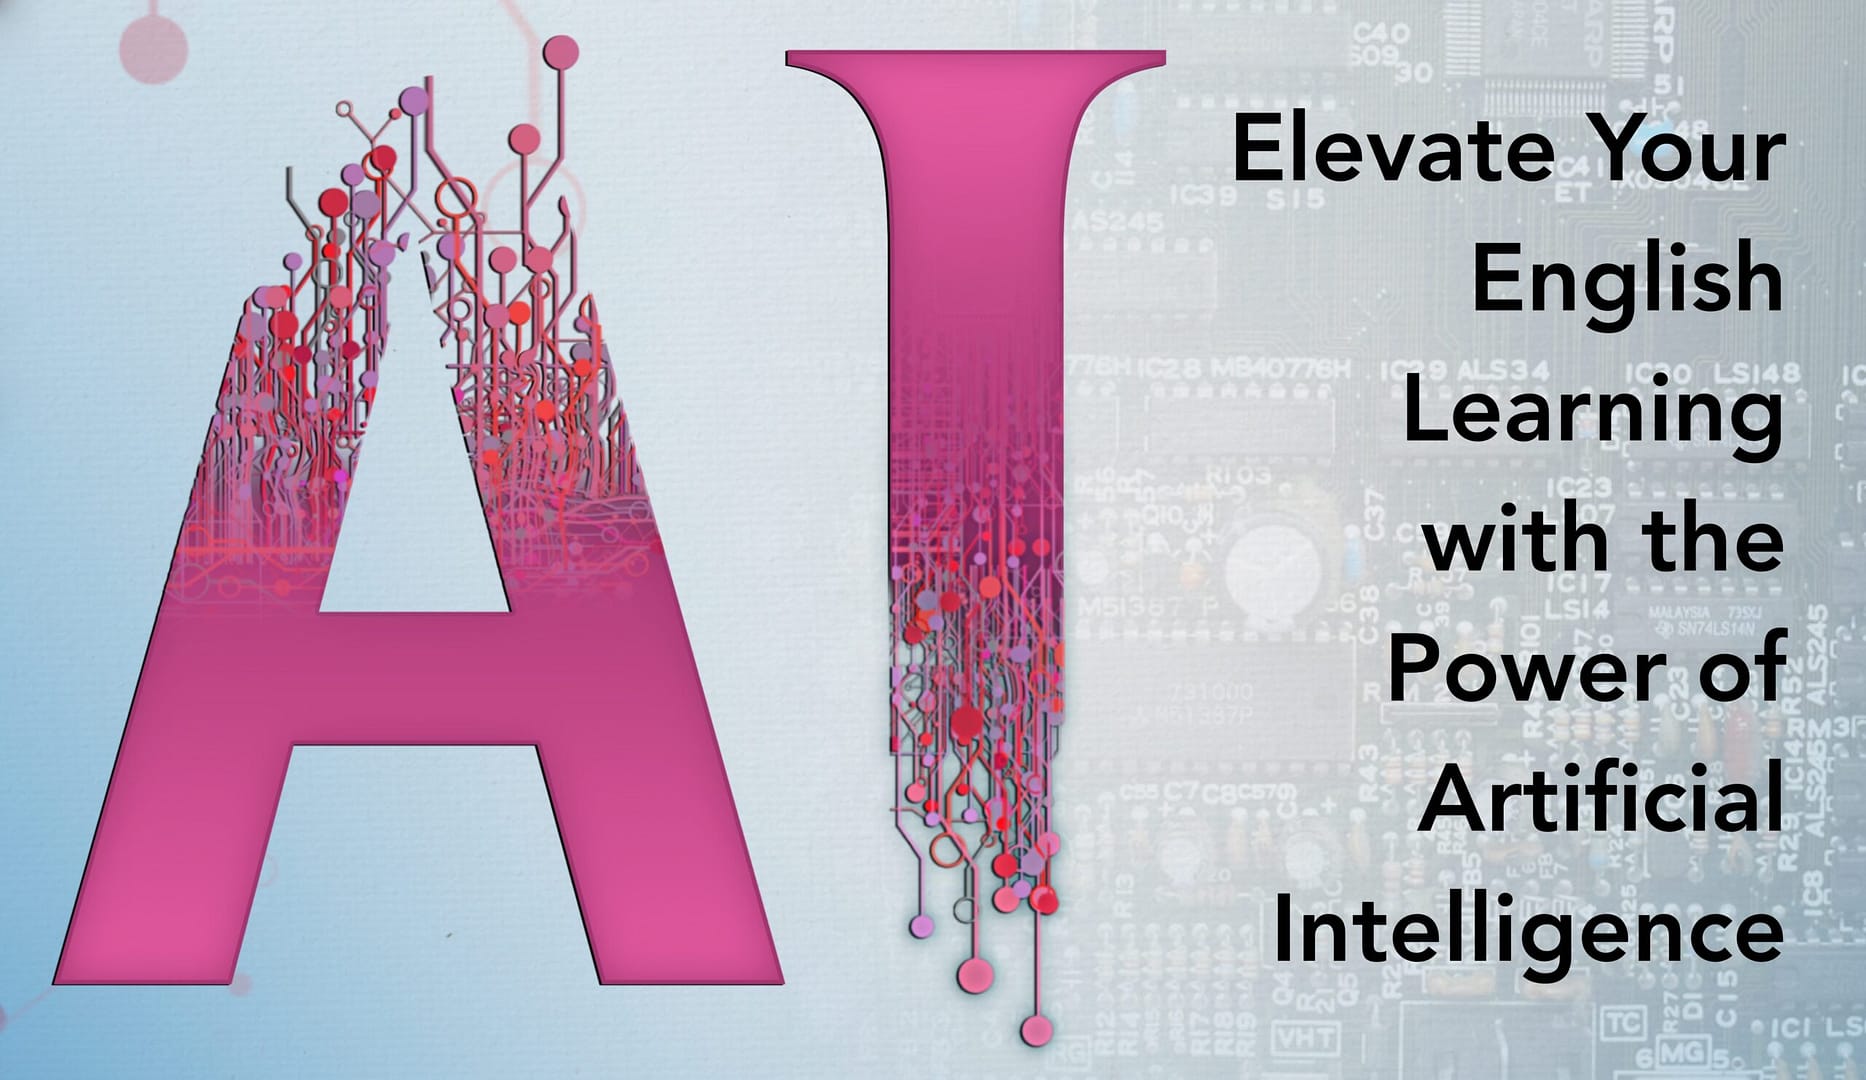 Elevate Your English Learning with the Power of A.I.